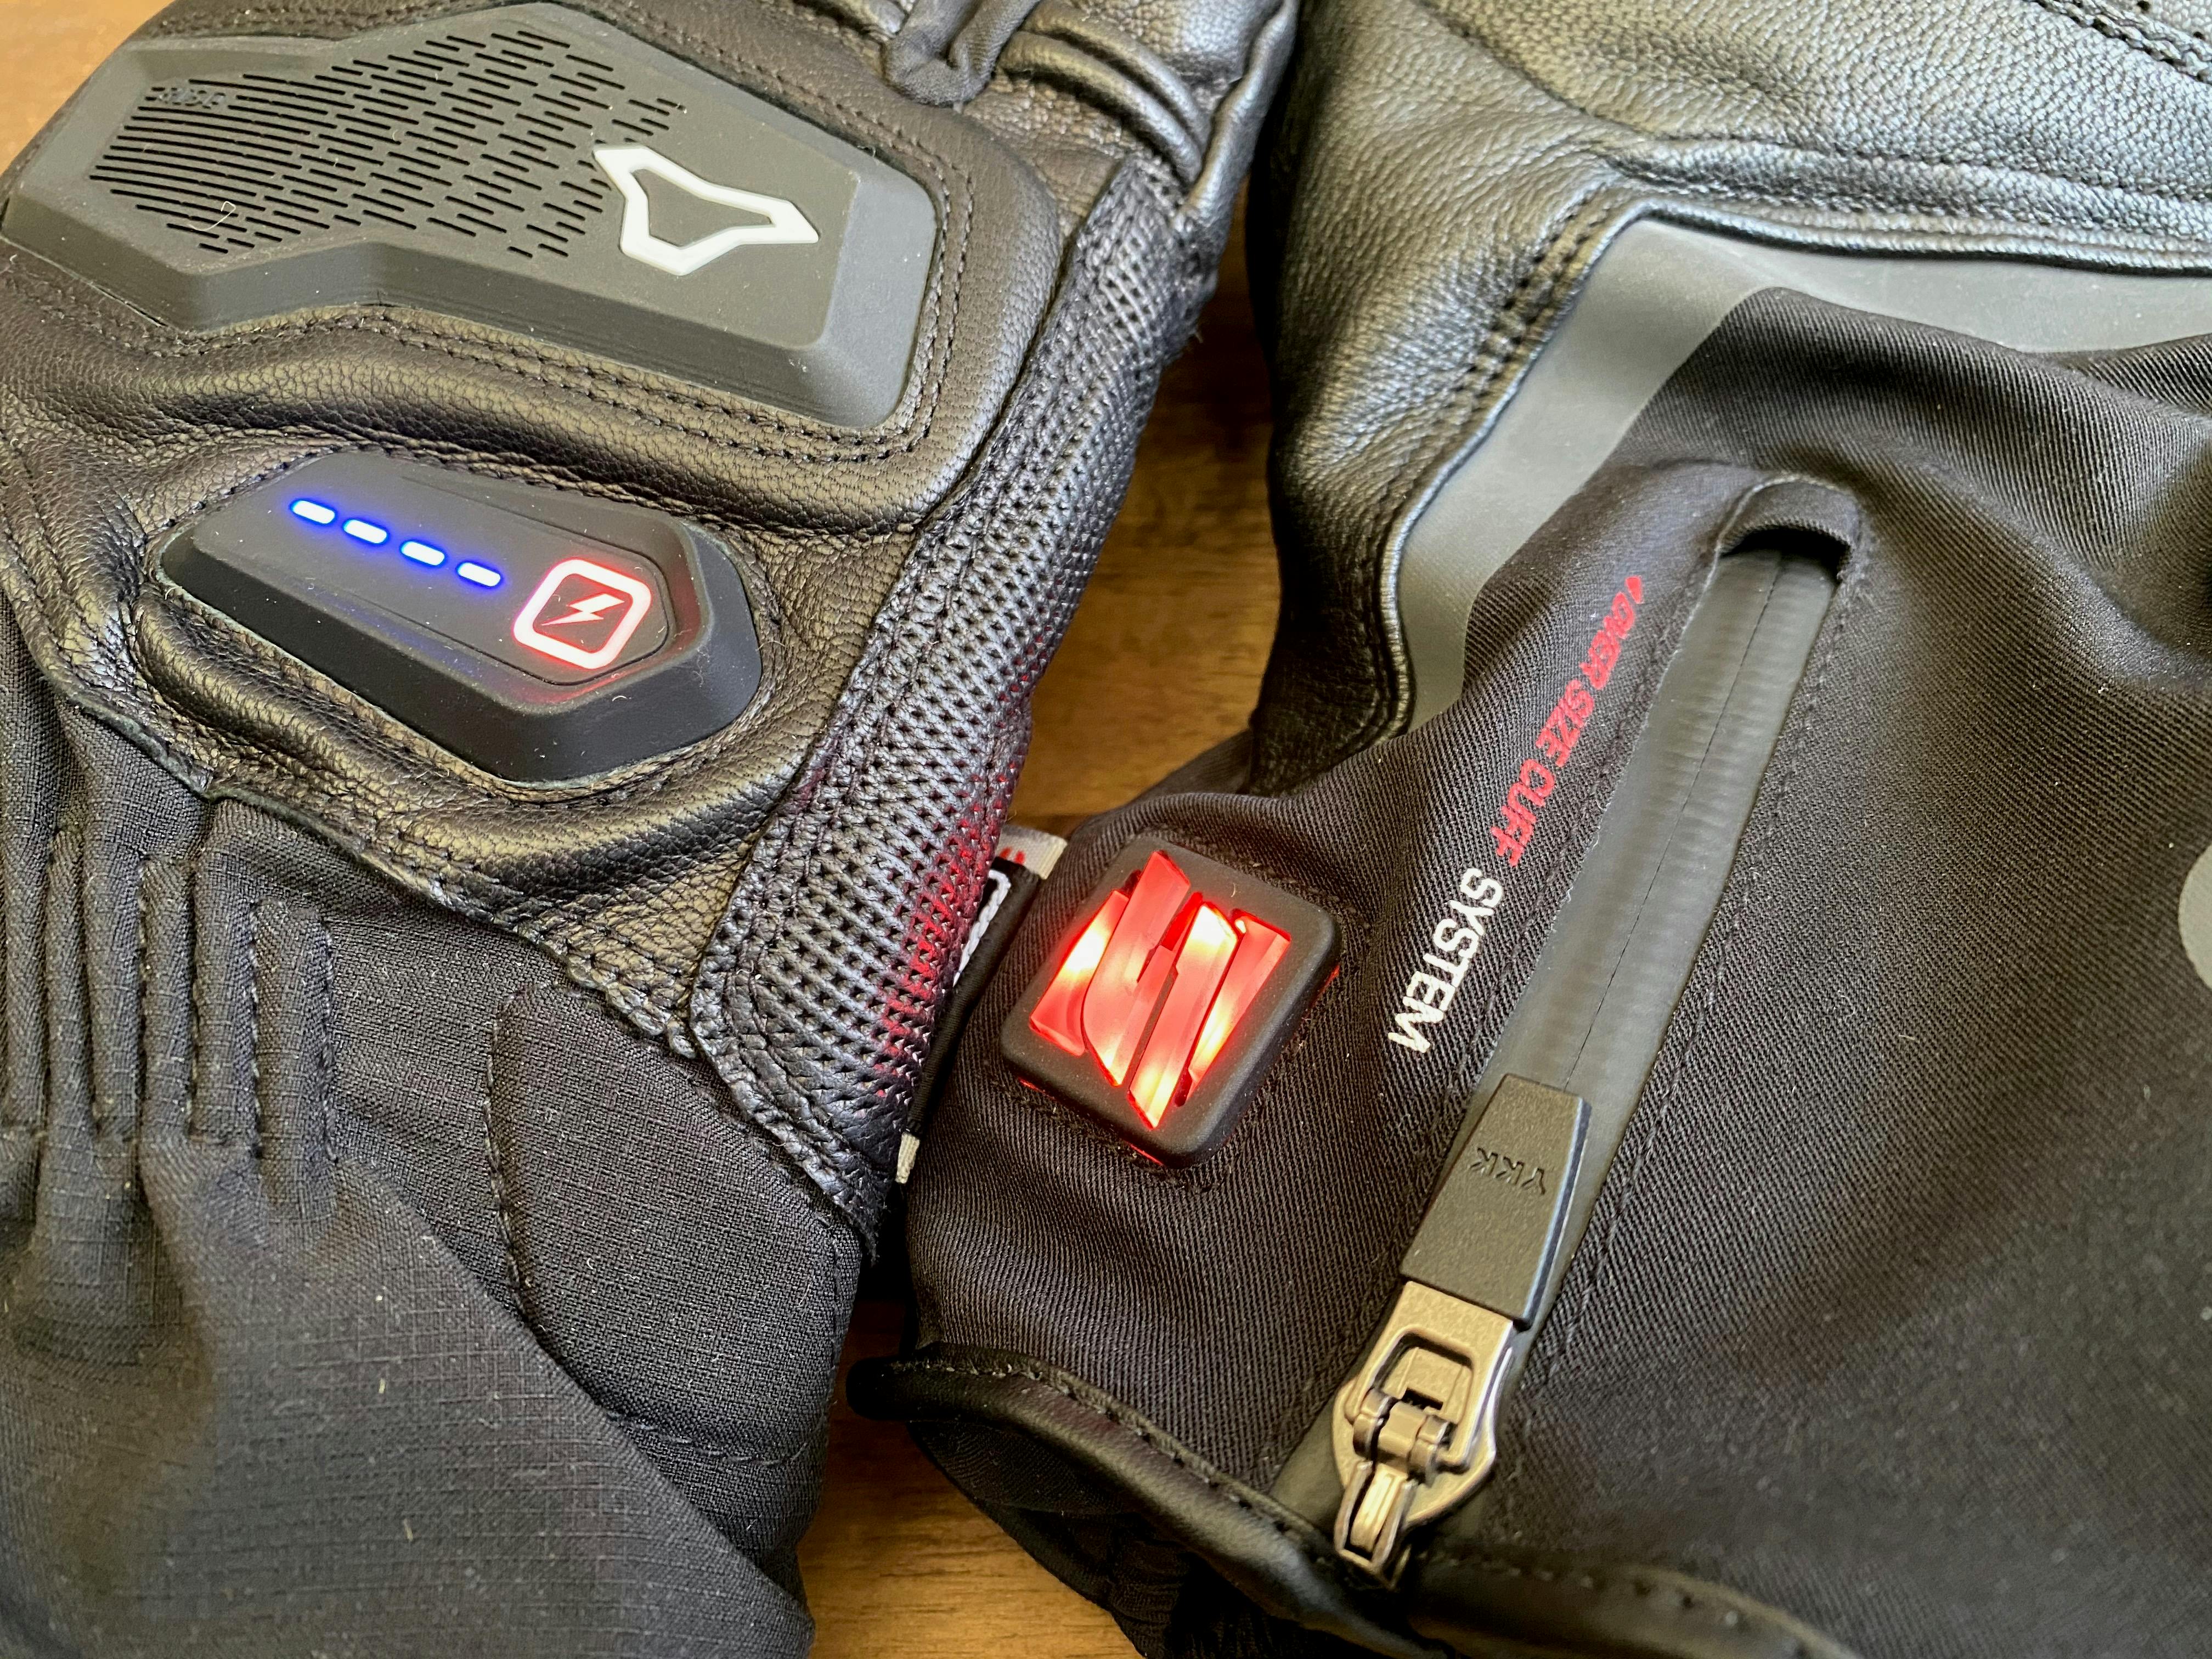 The control buttons side by side on the Five HG-1 glove and the Macna Ion glove